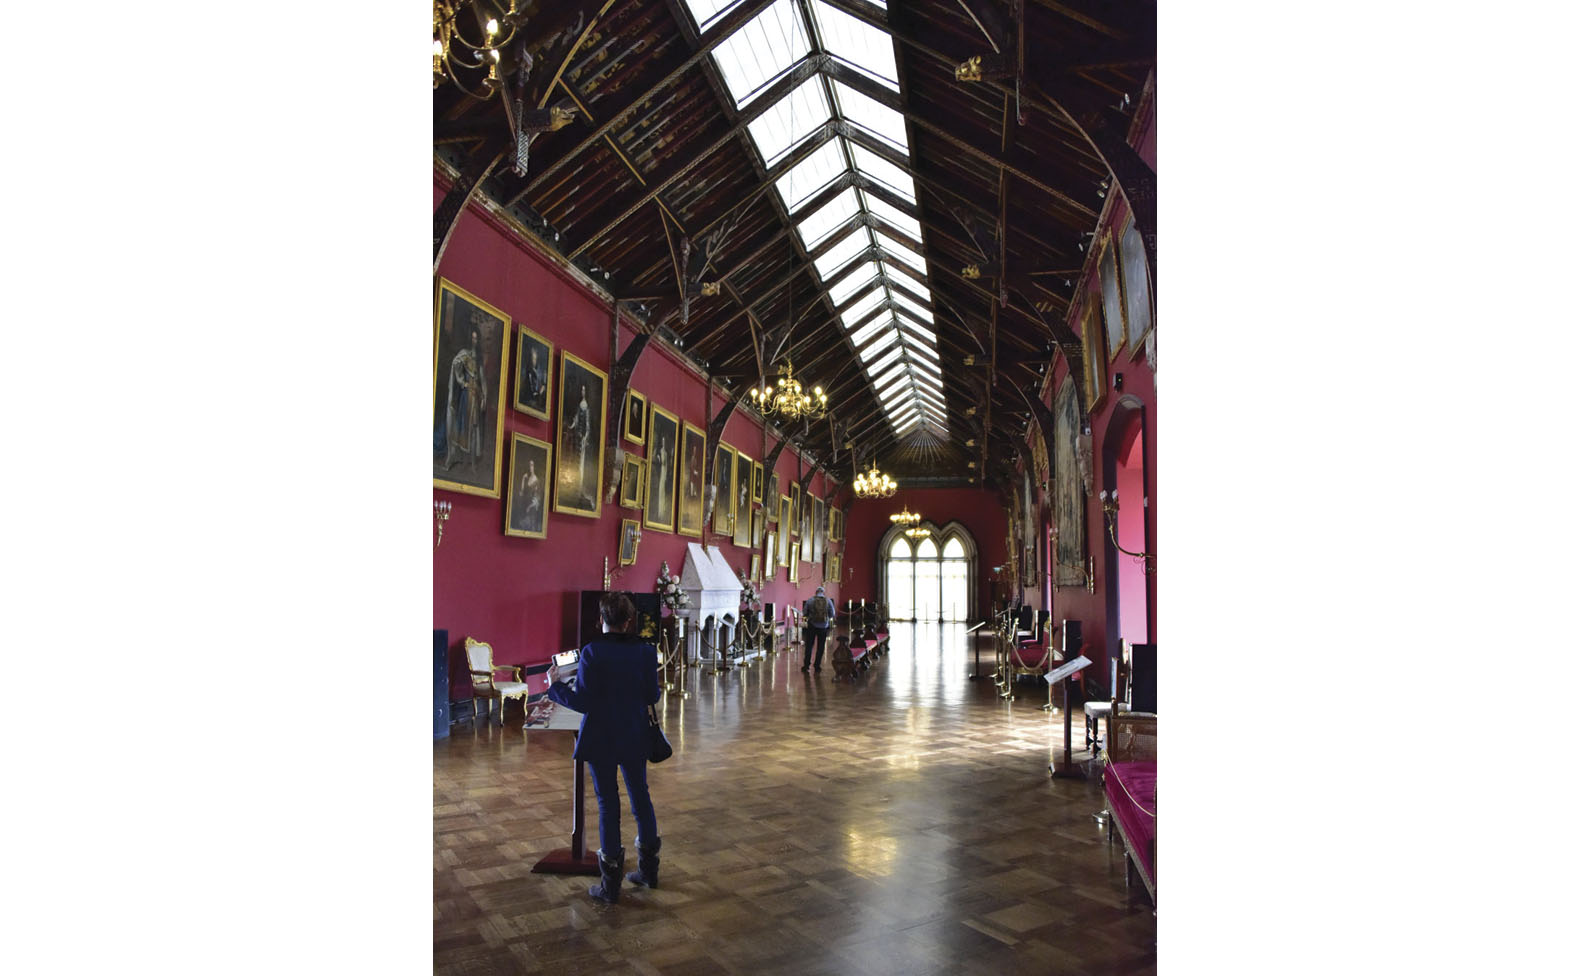 The portrait hall at Kilkenny Castle, some of which dates to the 16th century.